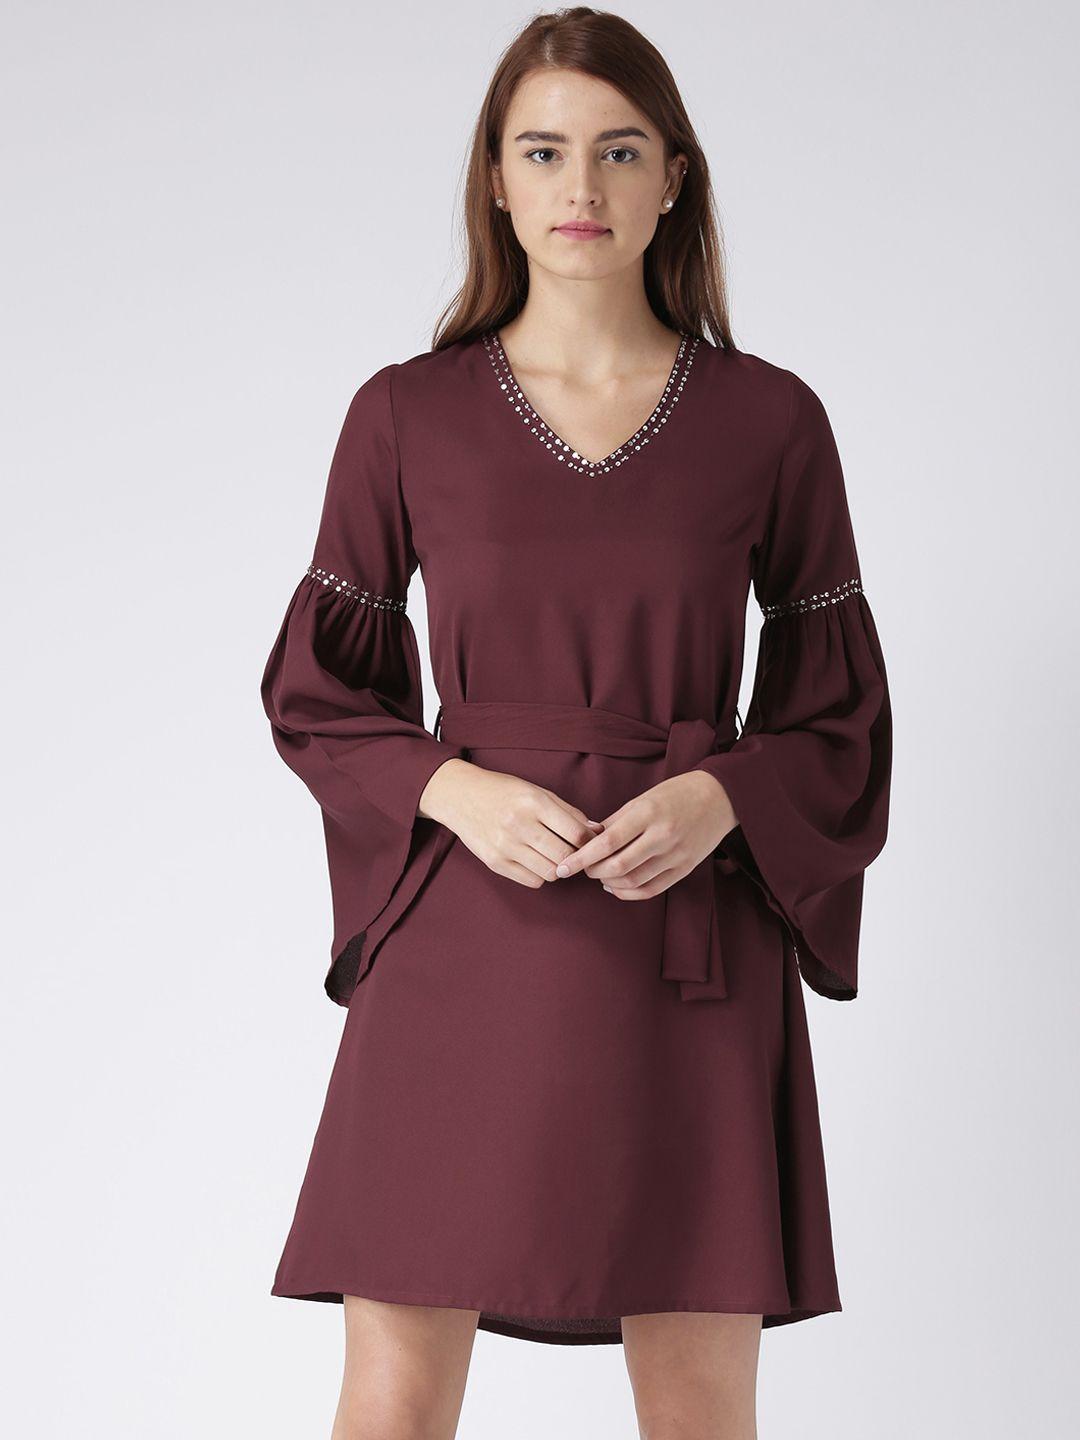 kassually women maroon gathered sleeve fit and flare dress